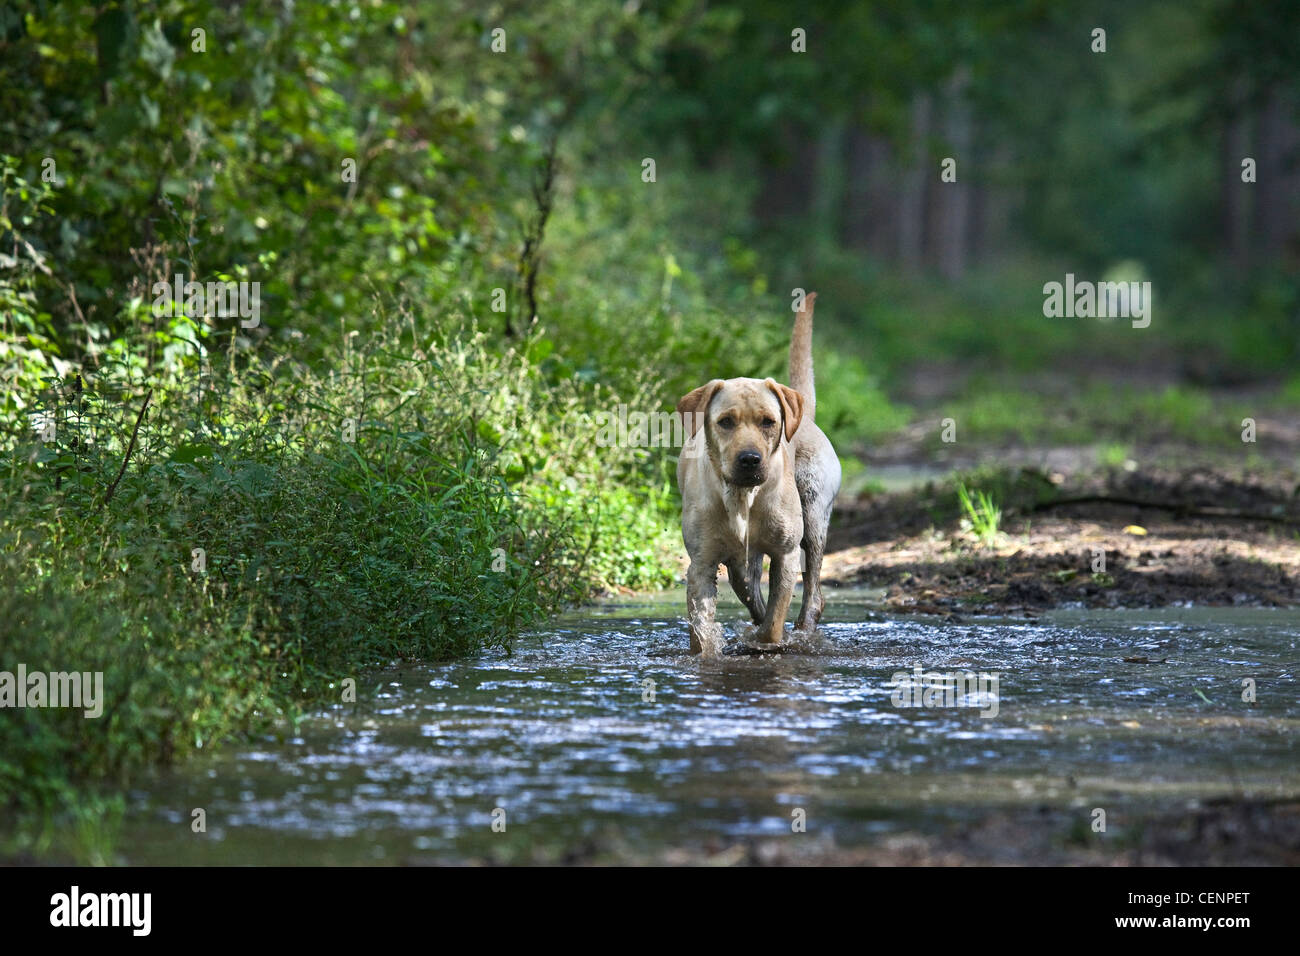 Labrador dog walking through water of muddy puddle on footpath in forest, Belgium Stock Photo